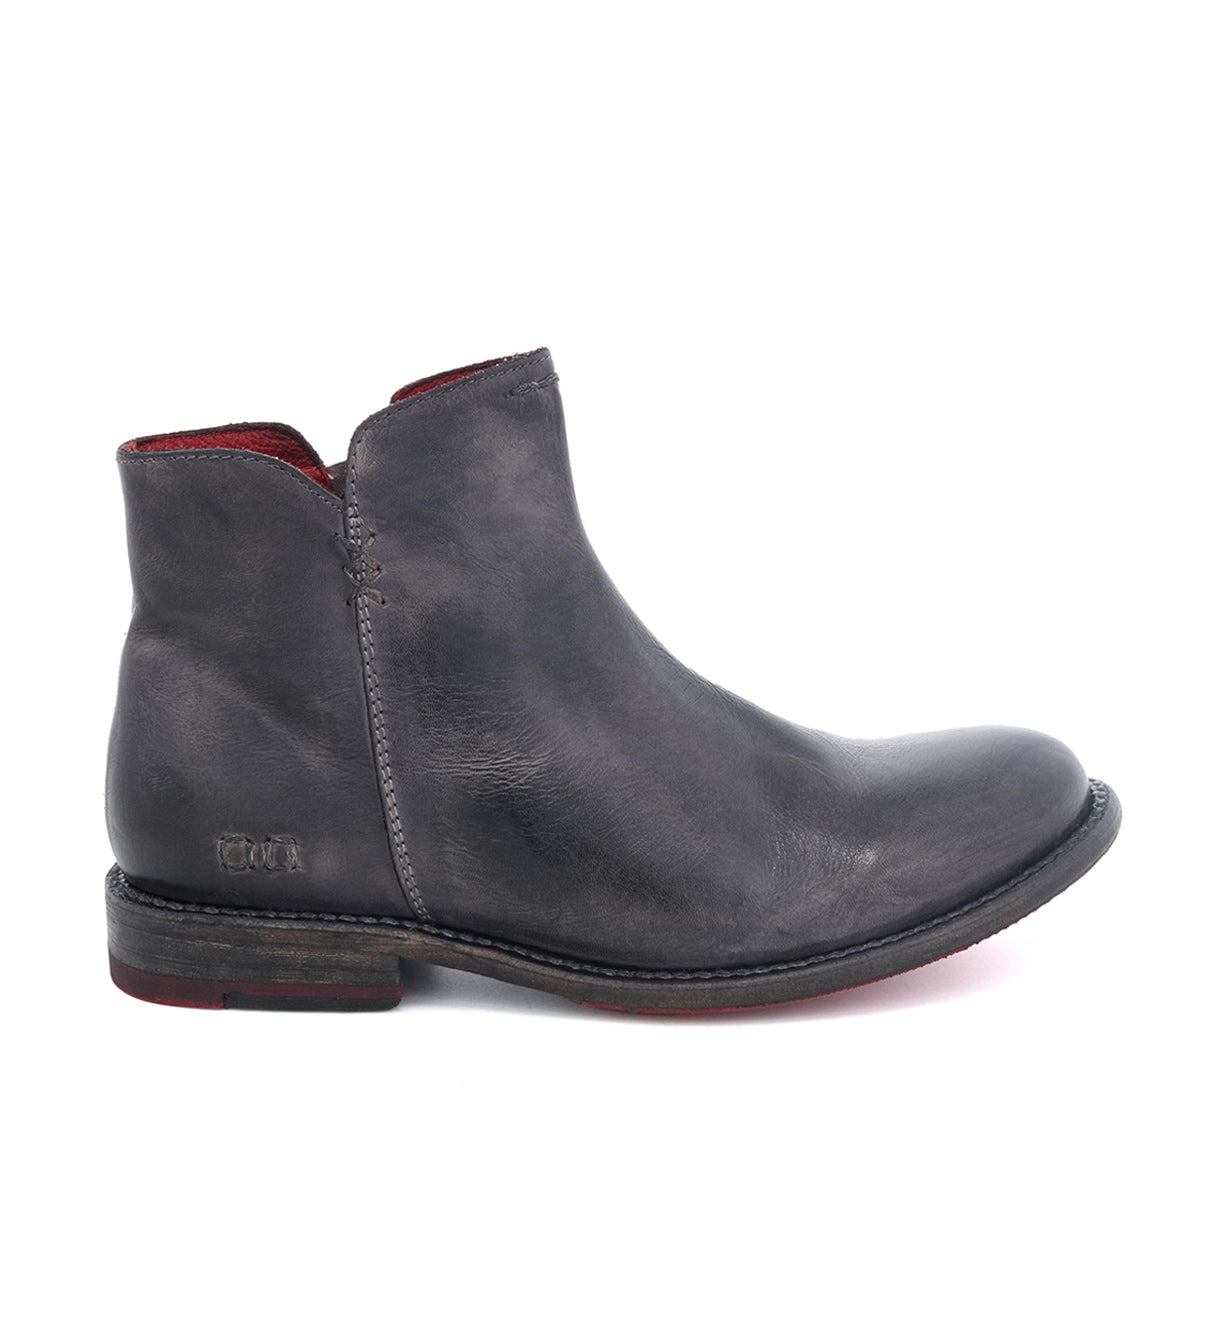 Women's Yurisa black leather chelsea boots from Bed Stu.